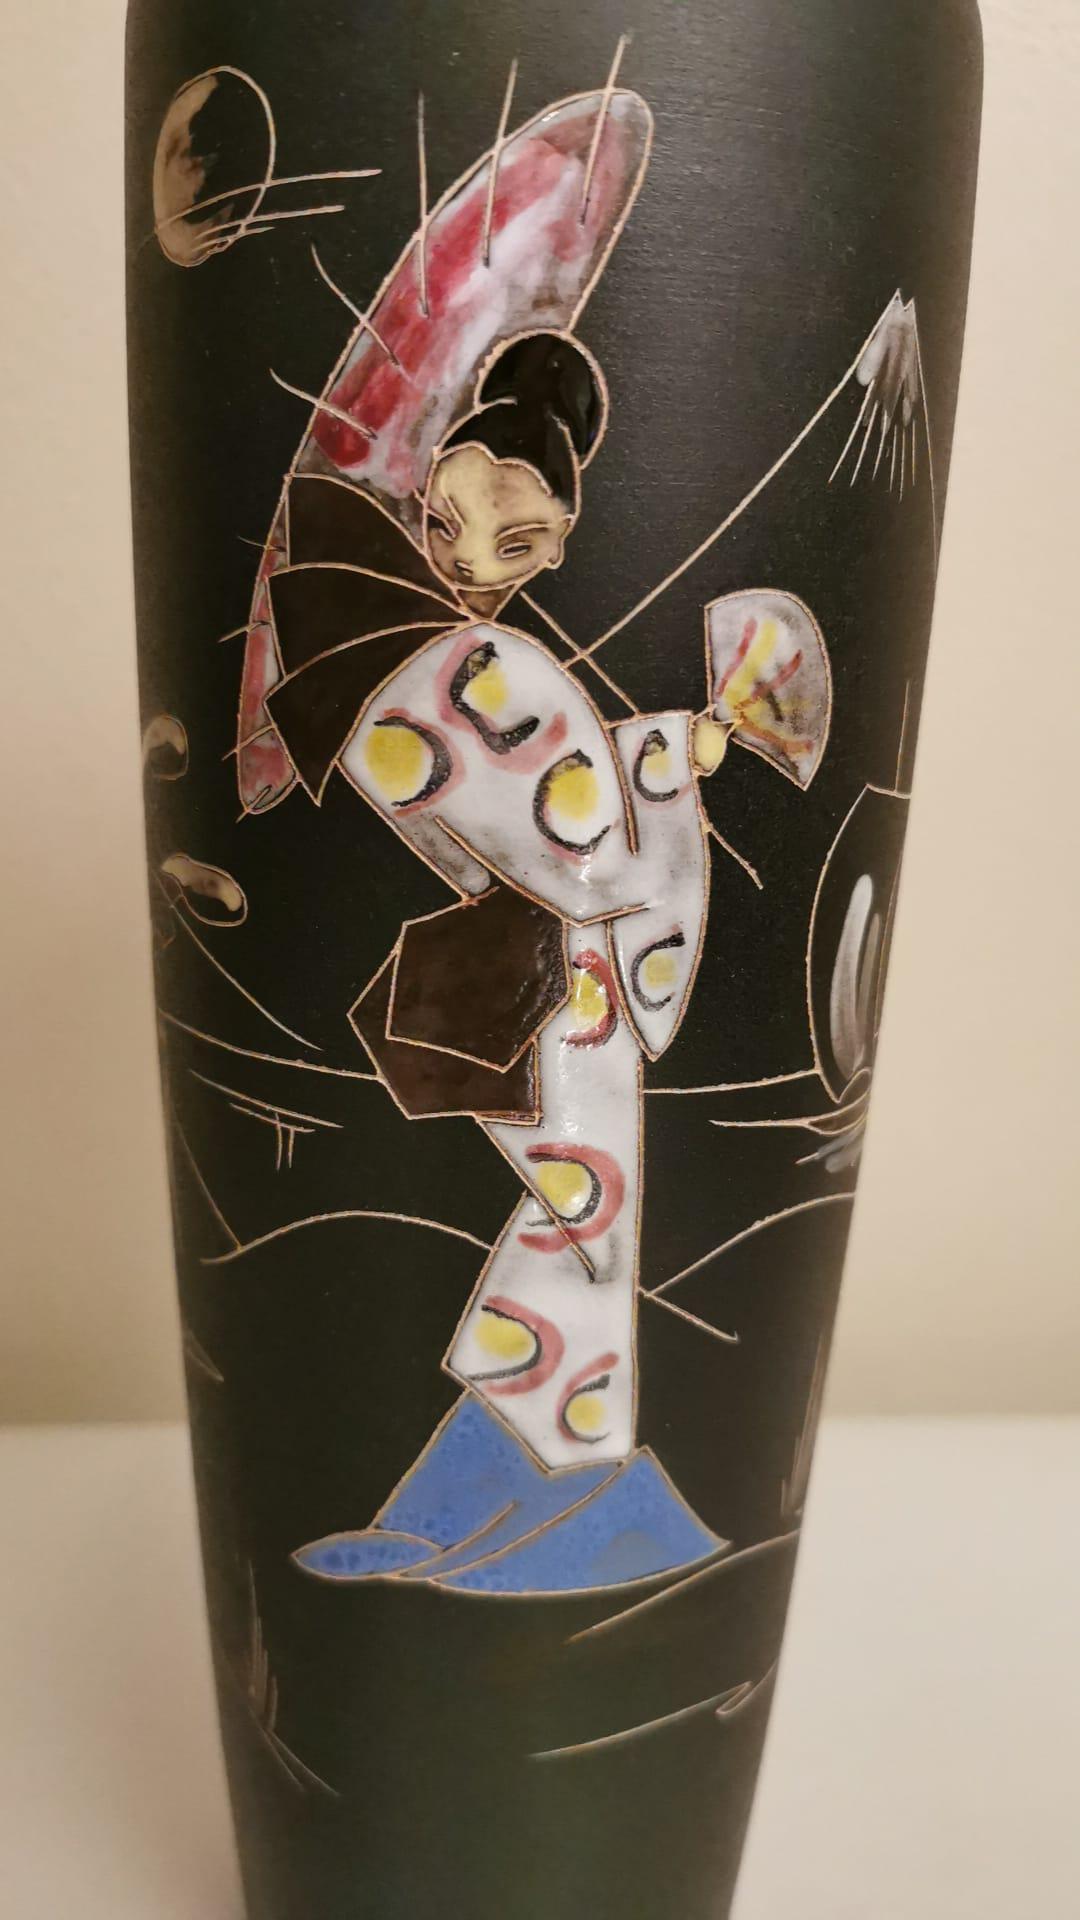 Ruscha Keramik Germany Vintage Ceramic Vase With Japanese Decoration In Good Condition For Sale In Prato, Tuscany